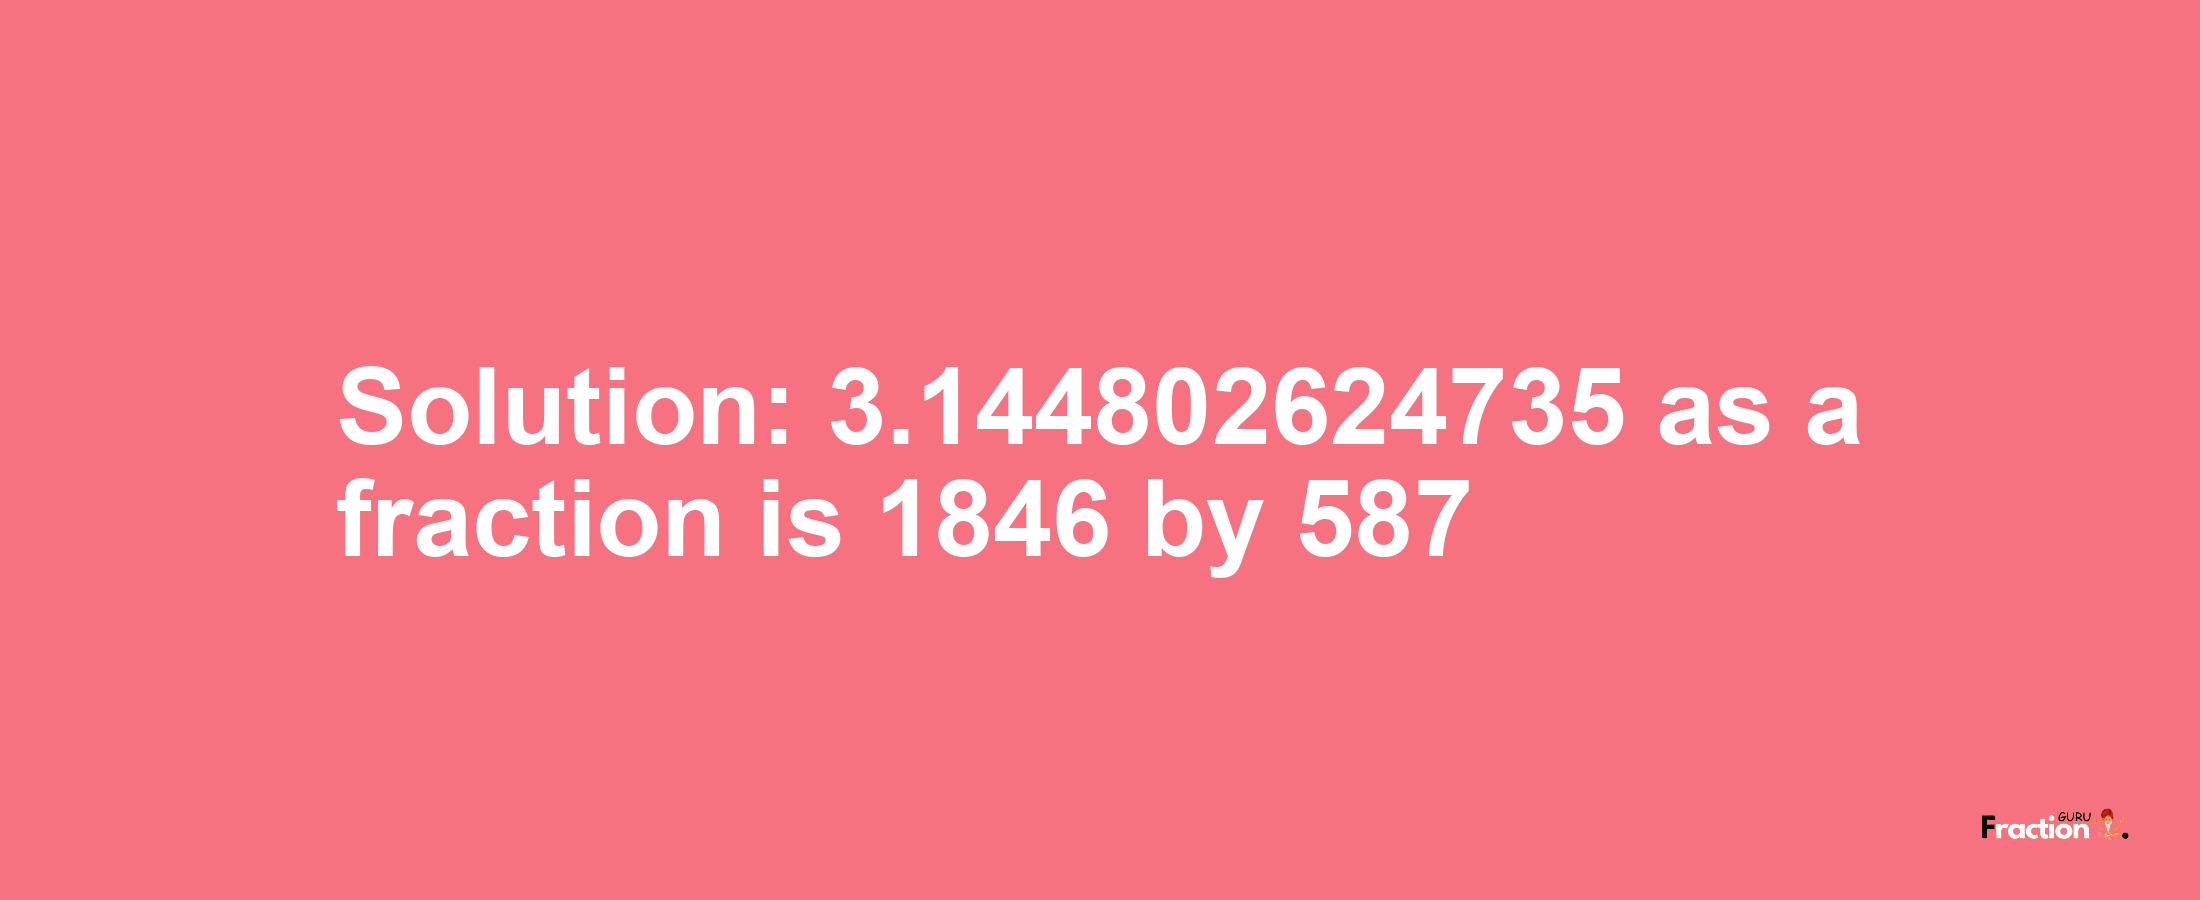 Solution:3.144802624735 as a fraction is 1846/587